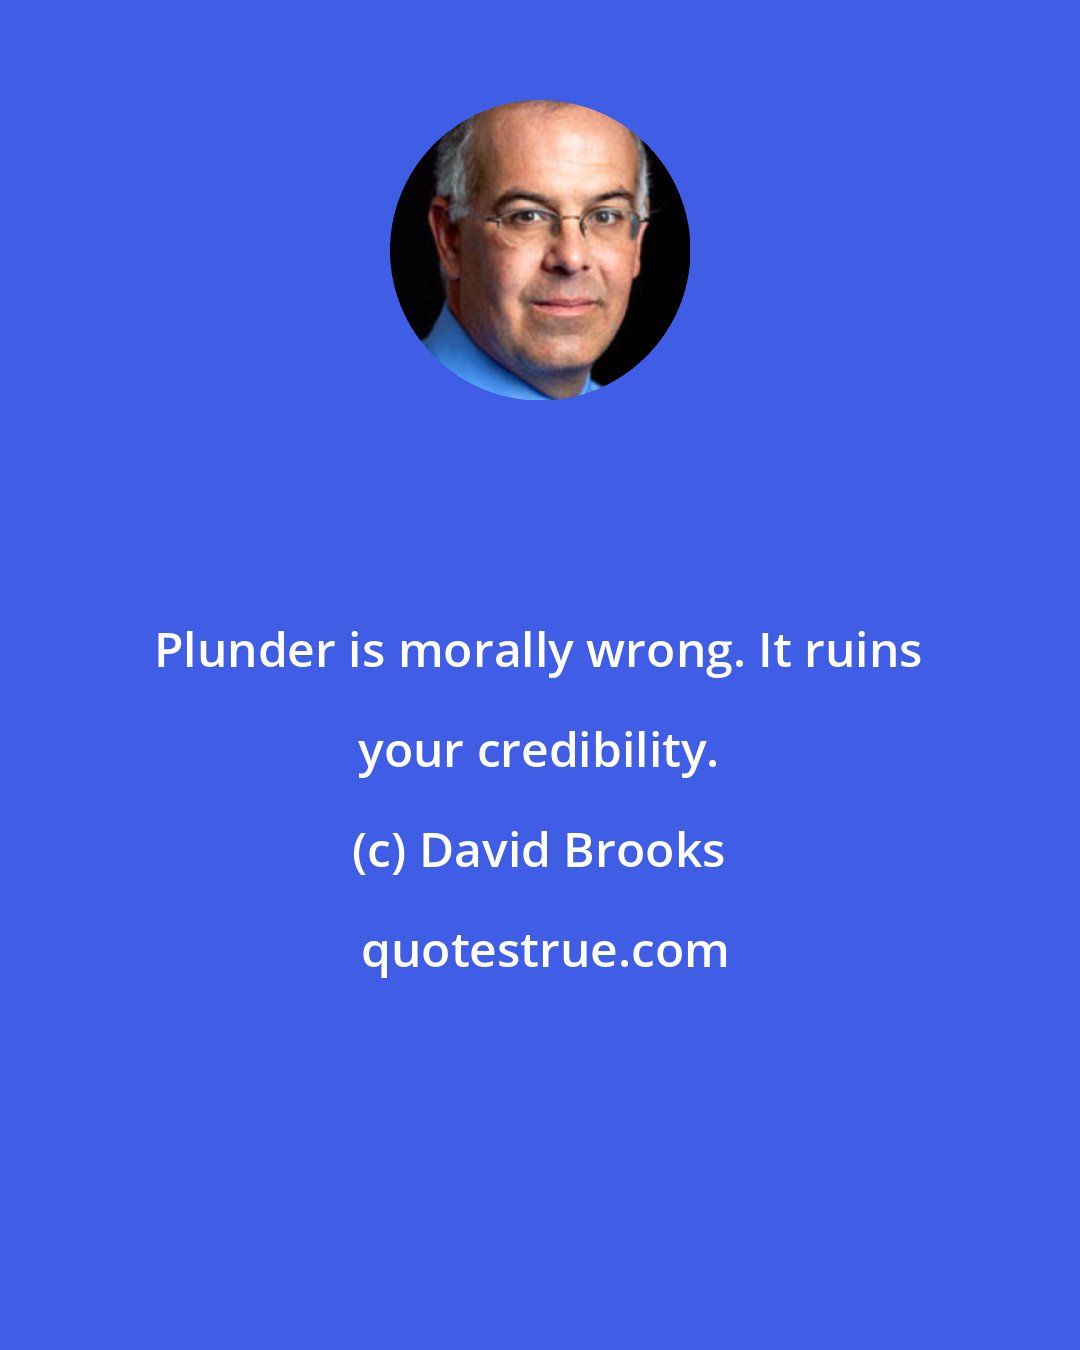 David Brooks: Plunder is morally wrong. It ruins your credibility.